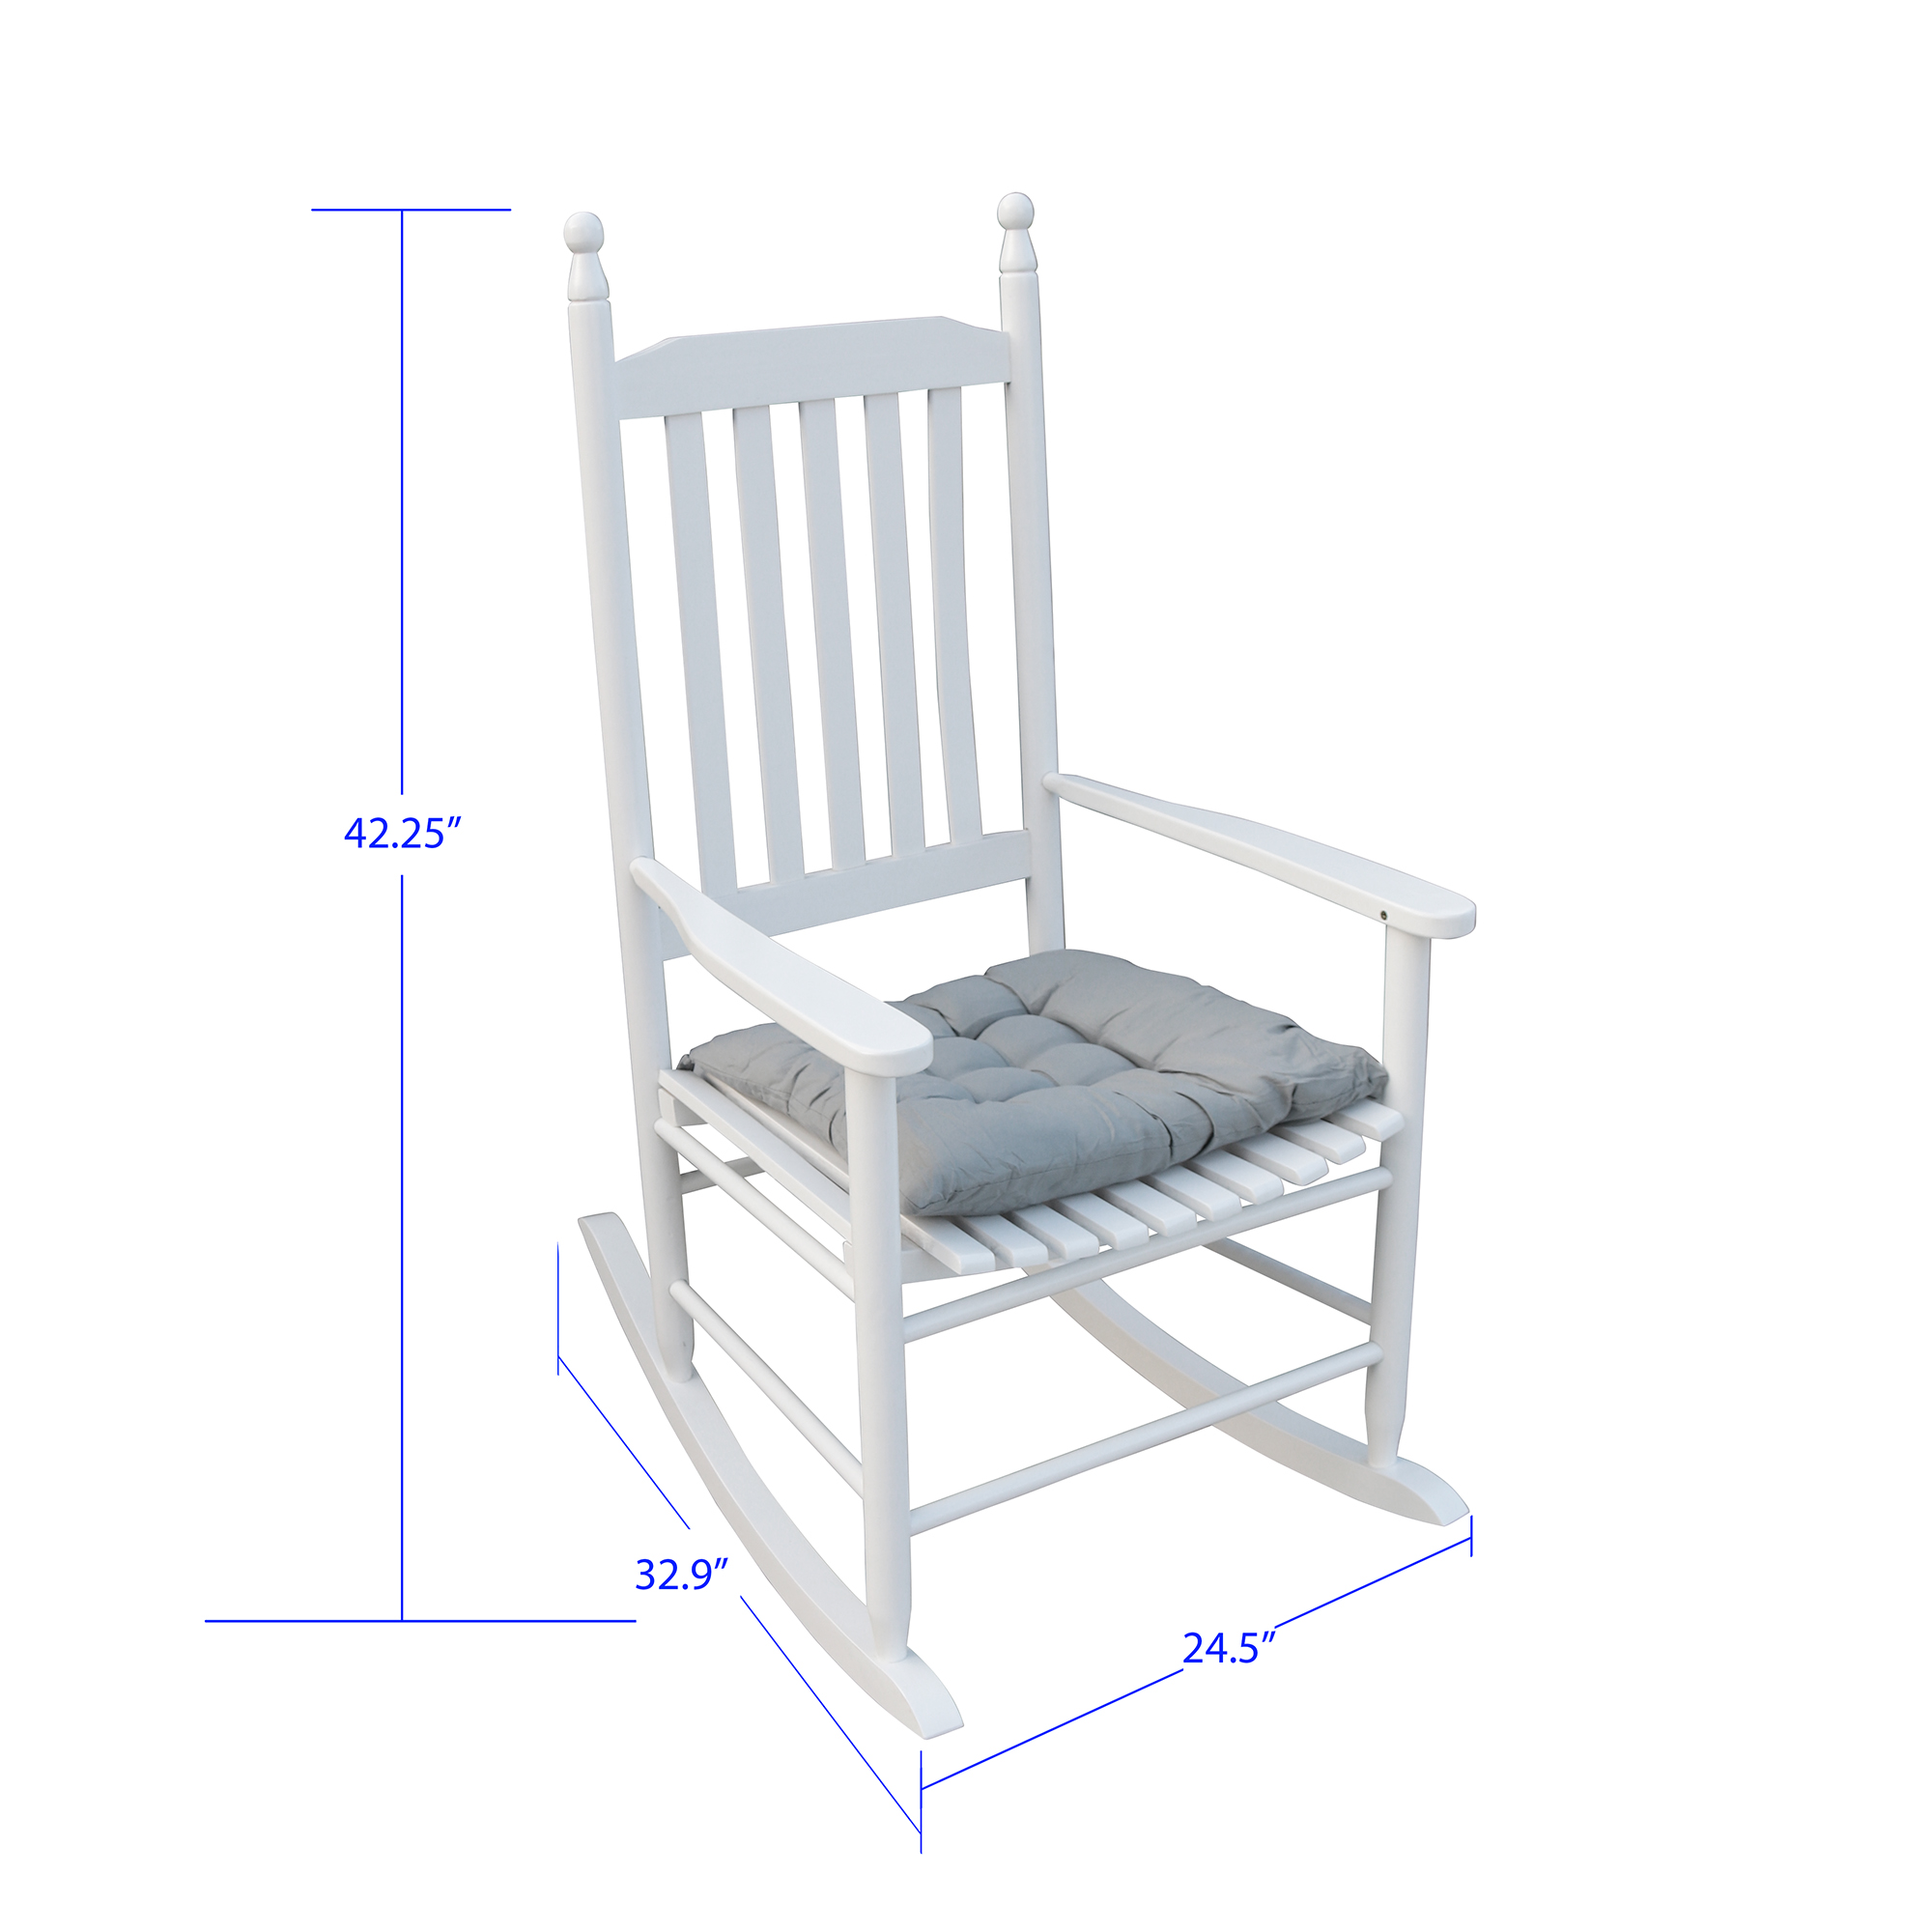 Rocking Chair for Outdoor, Wooden Patio Porch Rocker Chair with Back Support, Ergonomic Wooden Rocking Chair for Patio Porch Backyard, Rocking Bistro Chair Patio Chairs, Max 280lbs, White, A1582 - image 5 of 7